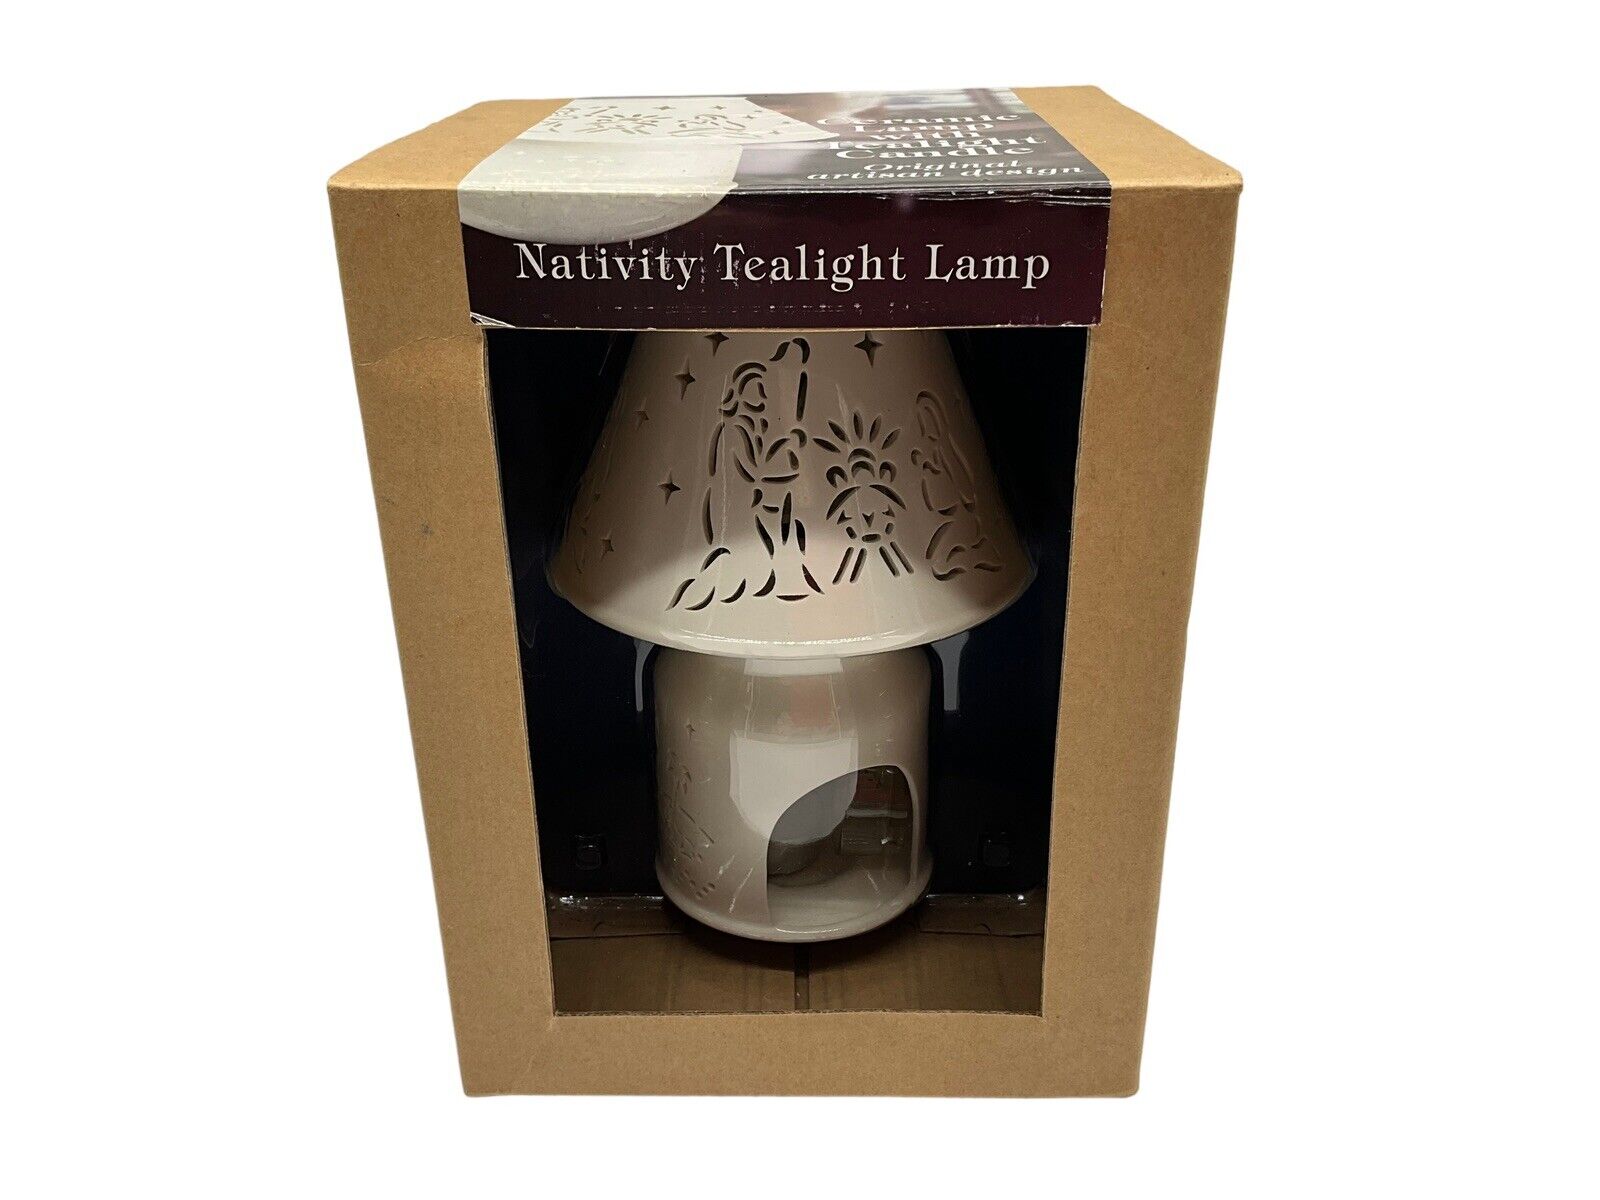 Nativity Ceramic Tealight Lamp New In Box Christmas Holiday Decor Candle Holder